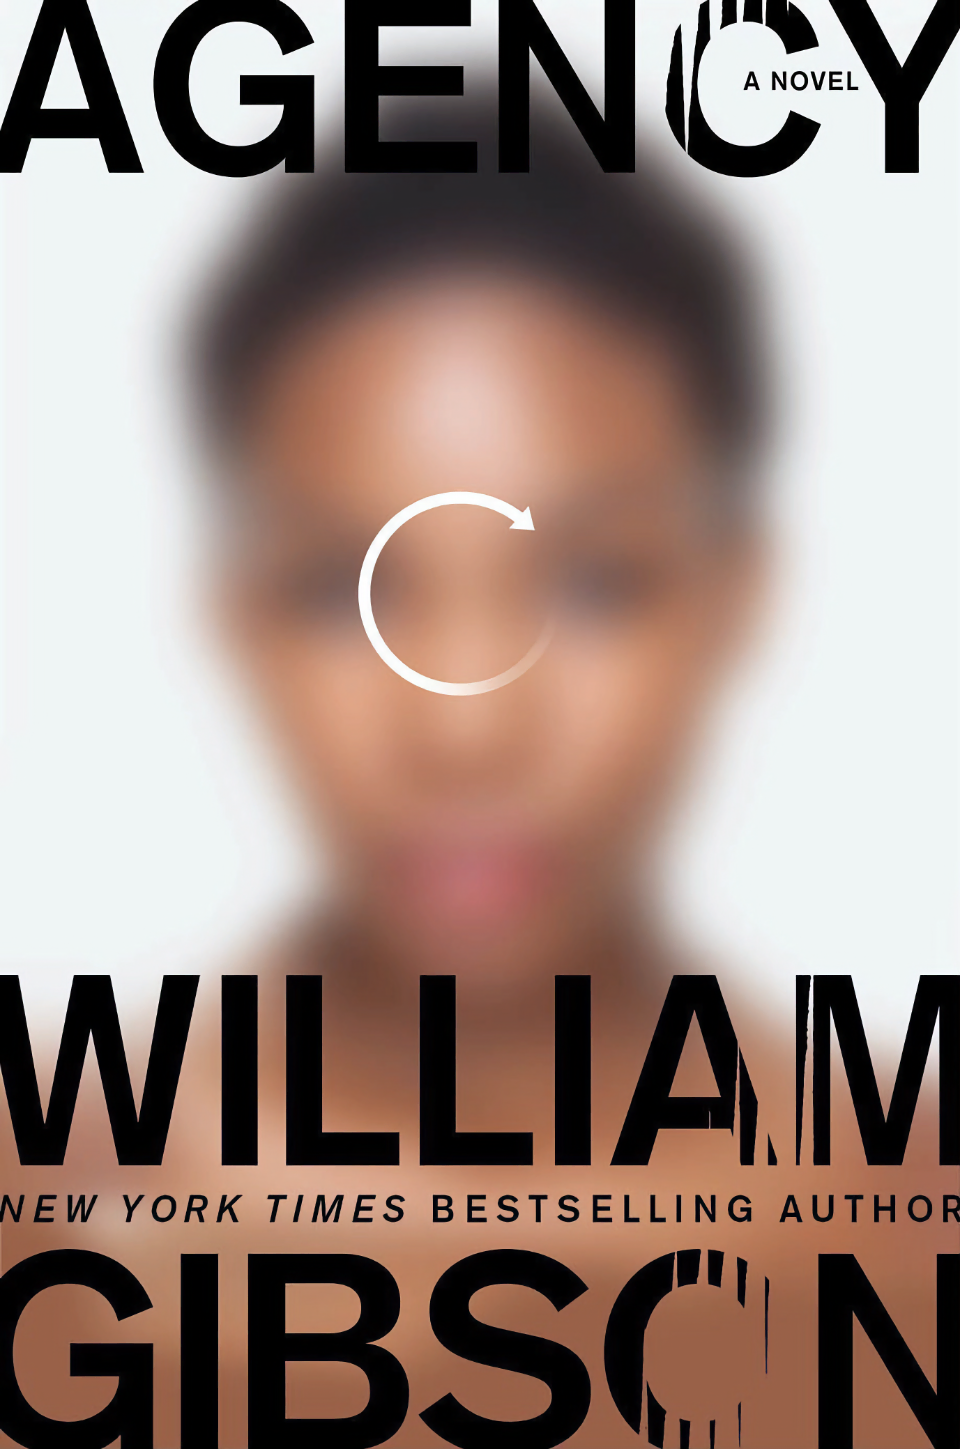 Agency by William Gibson finished on 2024 Mar 12